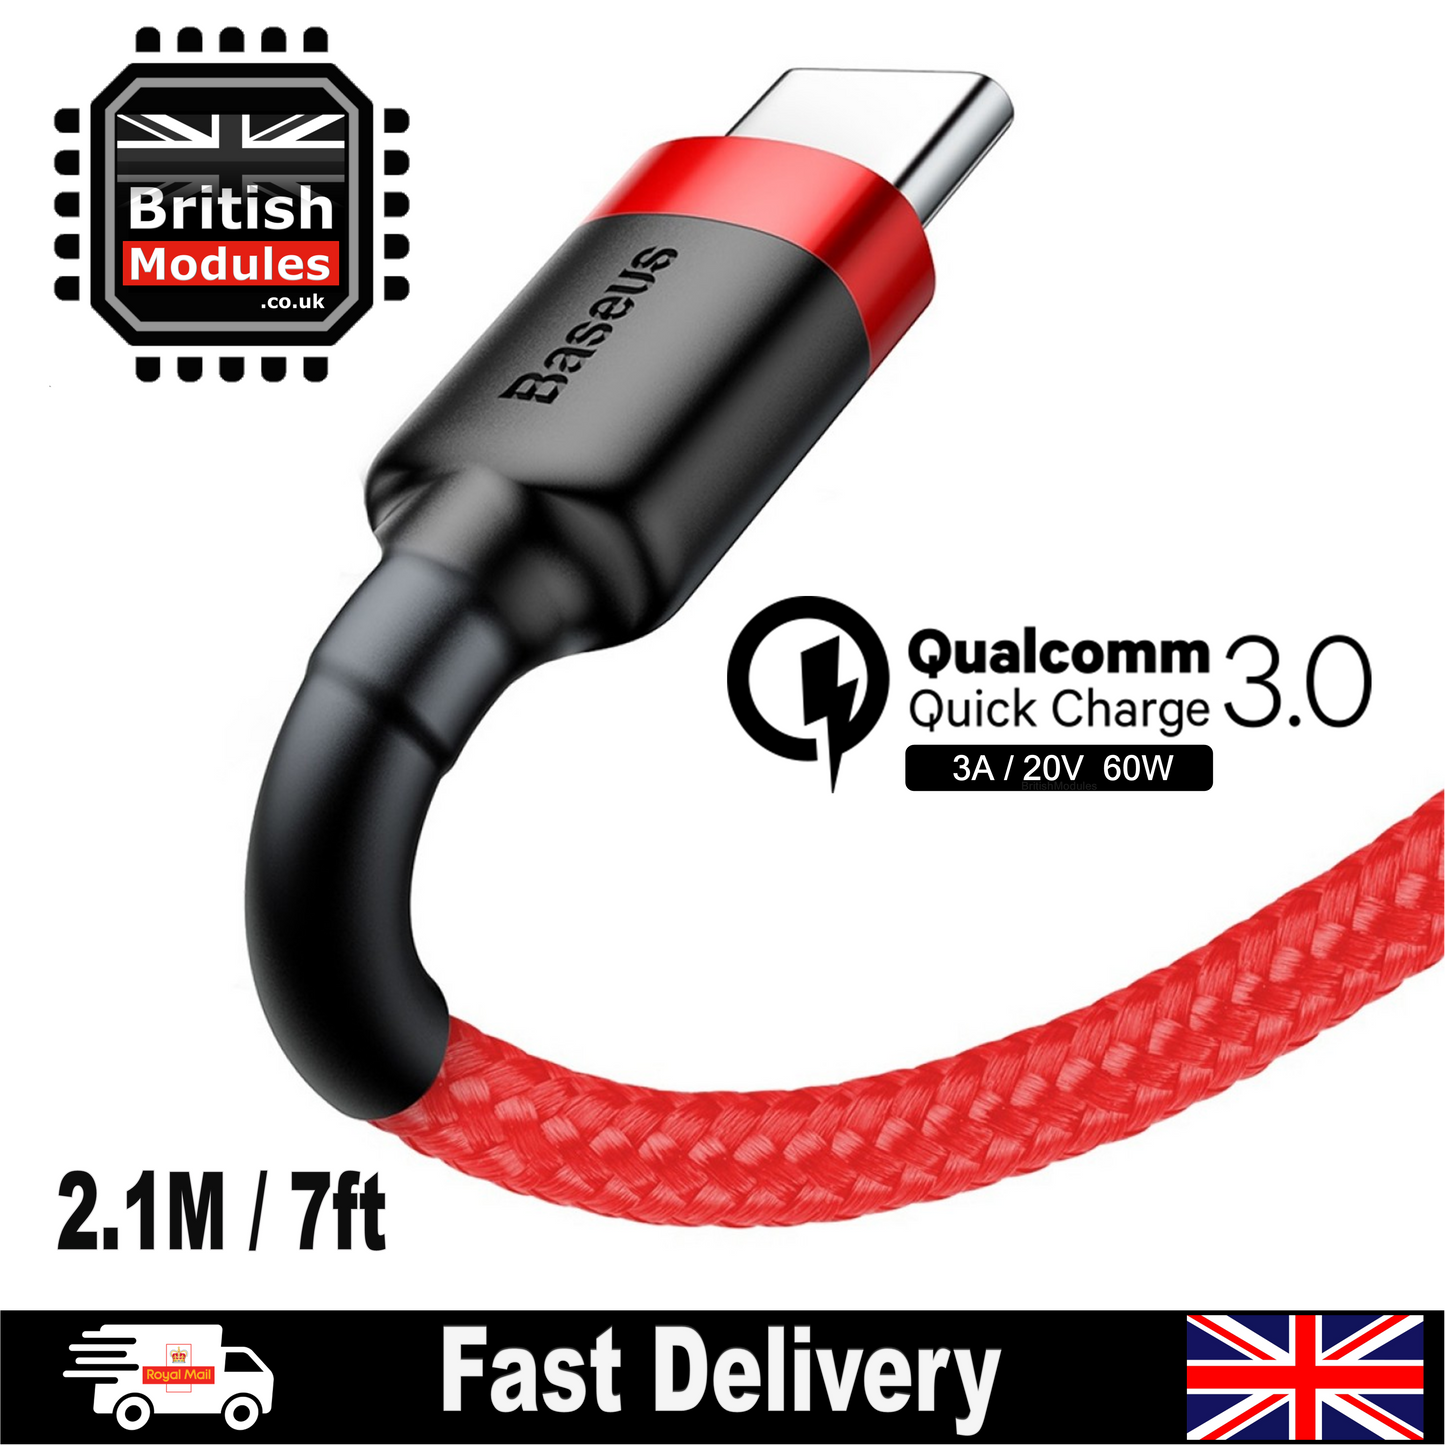 2M Baseus Braided USB Type C QC3.0 Fast Charging Cable Cord 3A Quick Charger Red